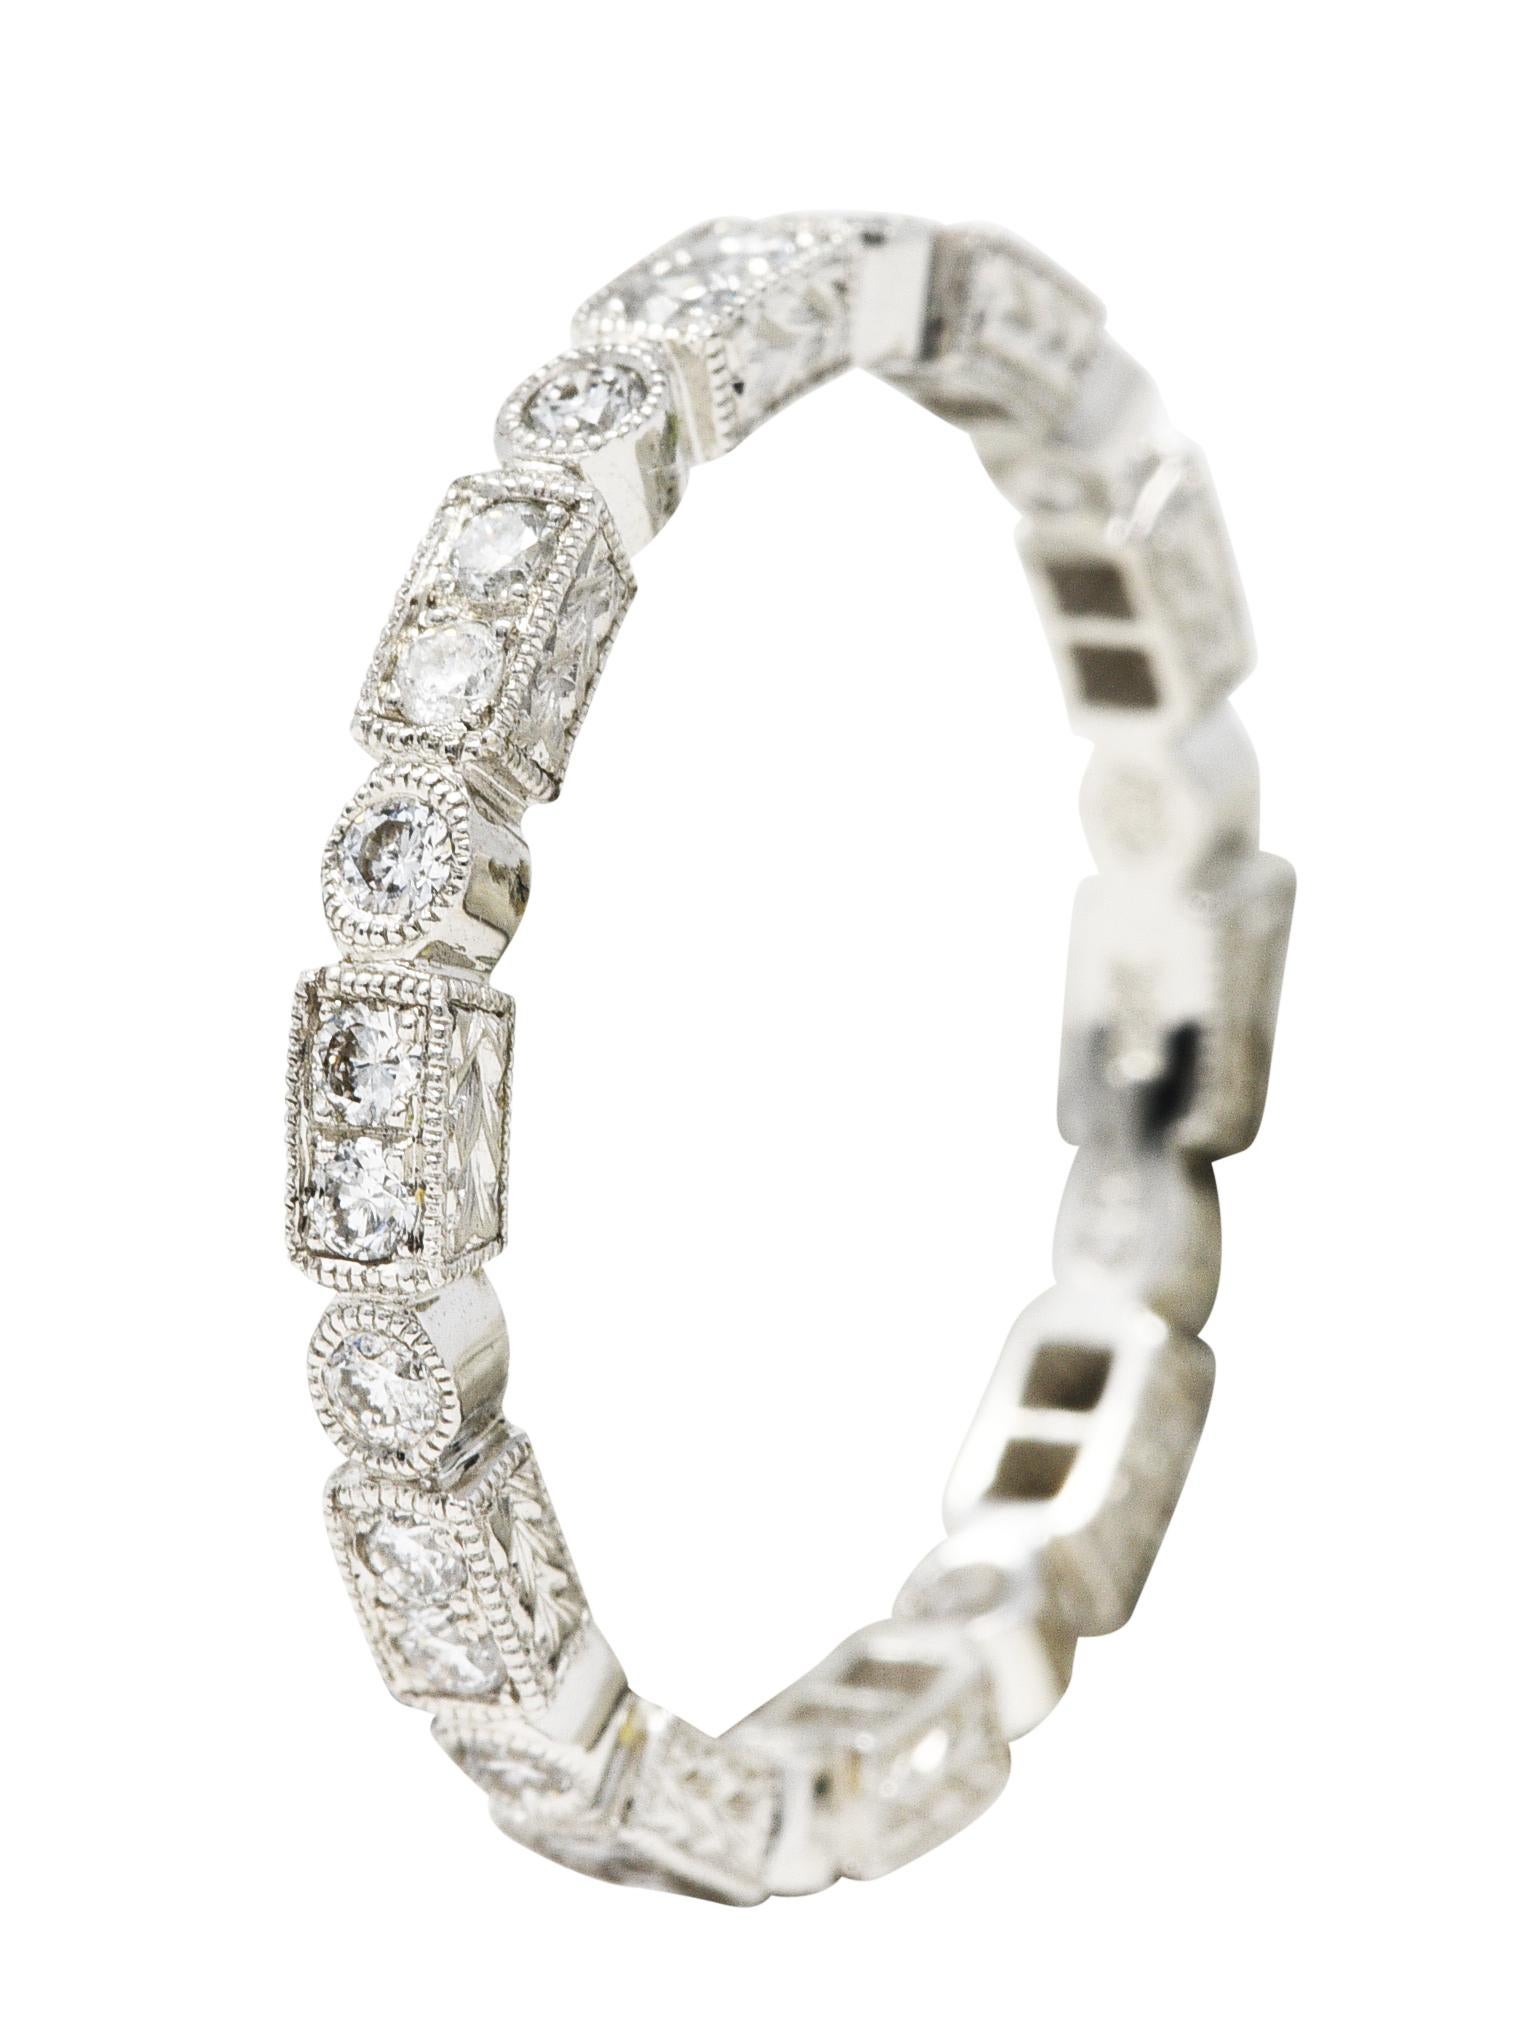 Eternity band ring is designed as a geometric pattern with milgrain

Rectangular forms alternate with circular forms while accented by round brilliant cut diamonds

Weighing in total approximately 0.50 carat with G/H color and VS clarity

Completed